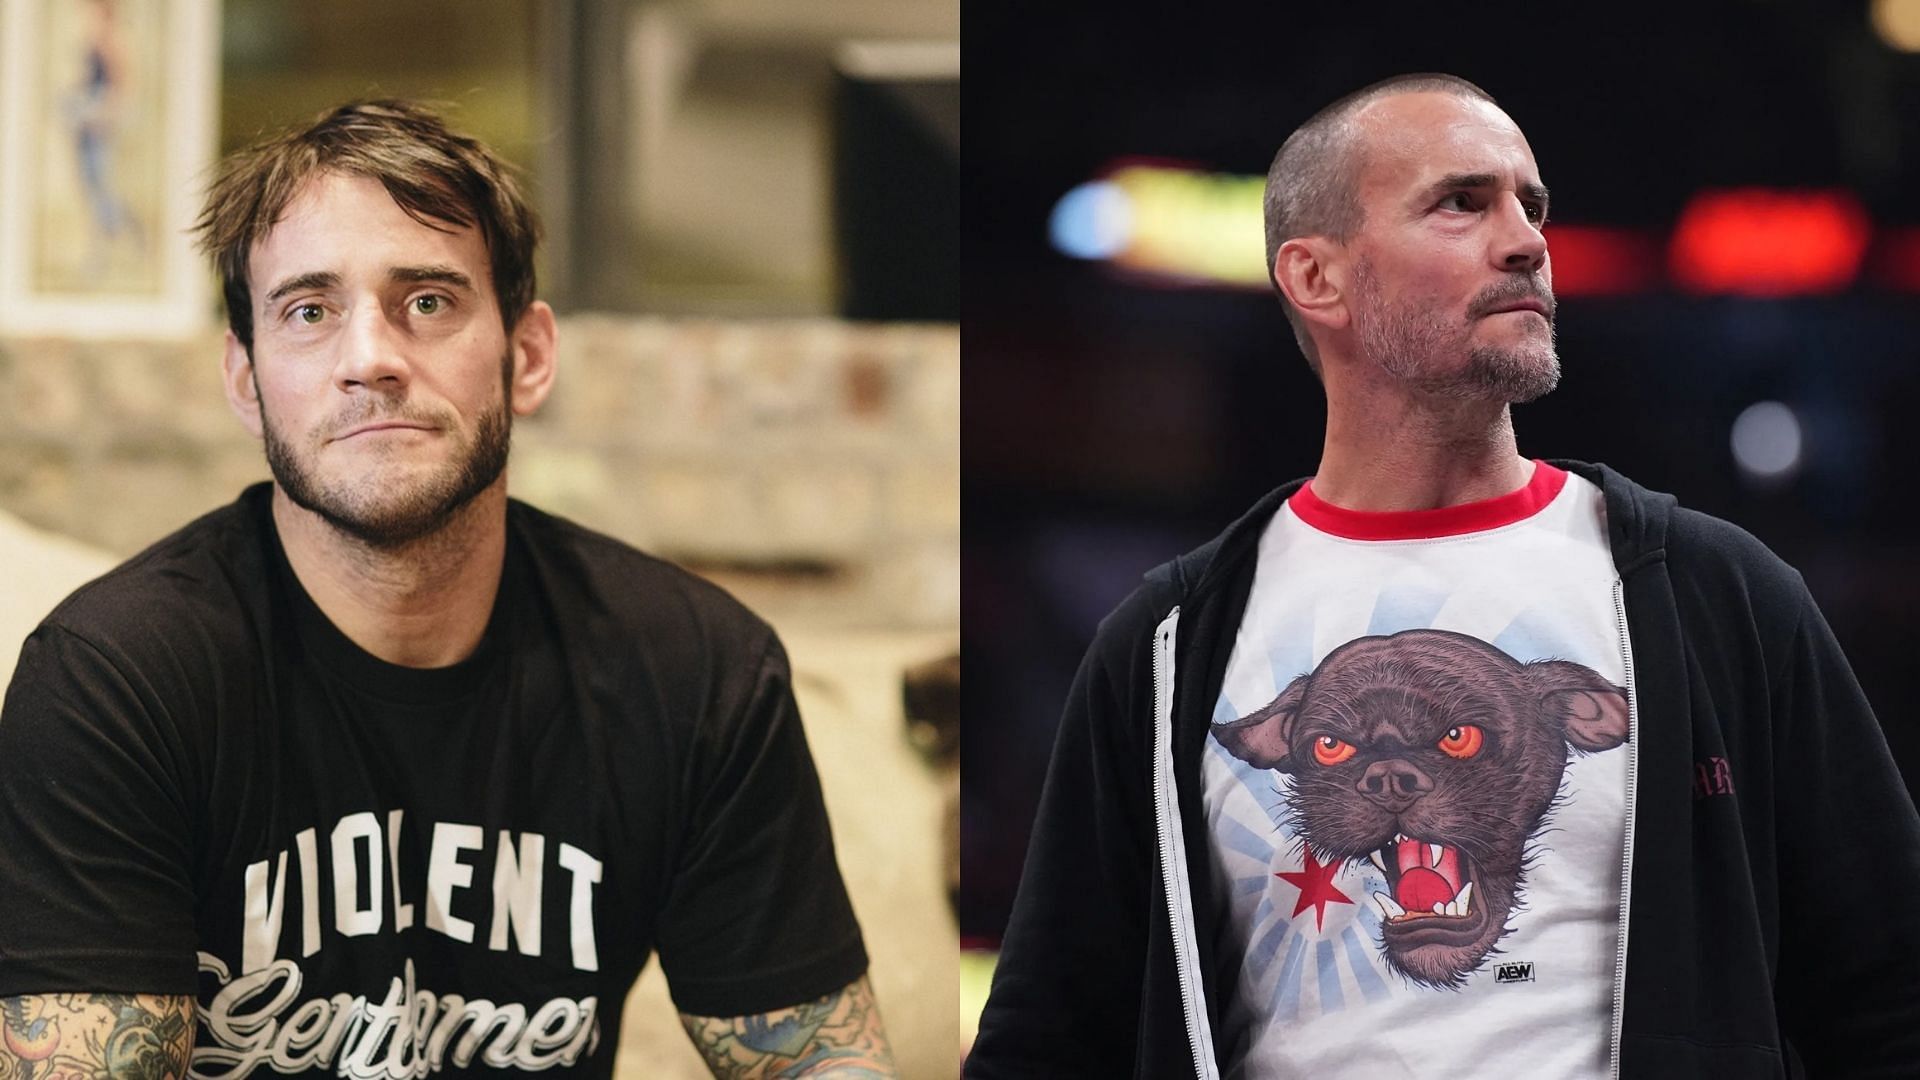 Is CM Punk heading back to WWE imminently?